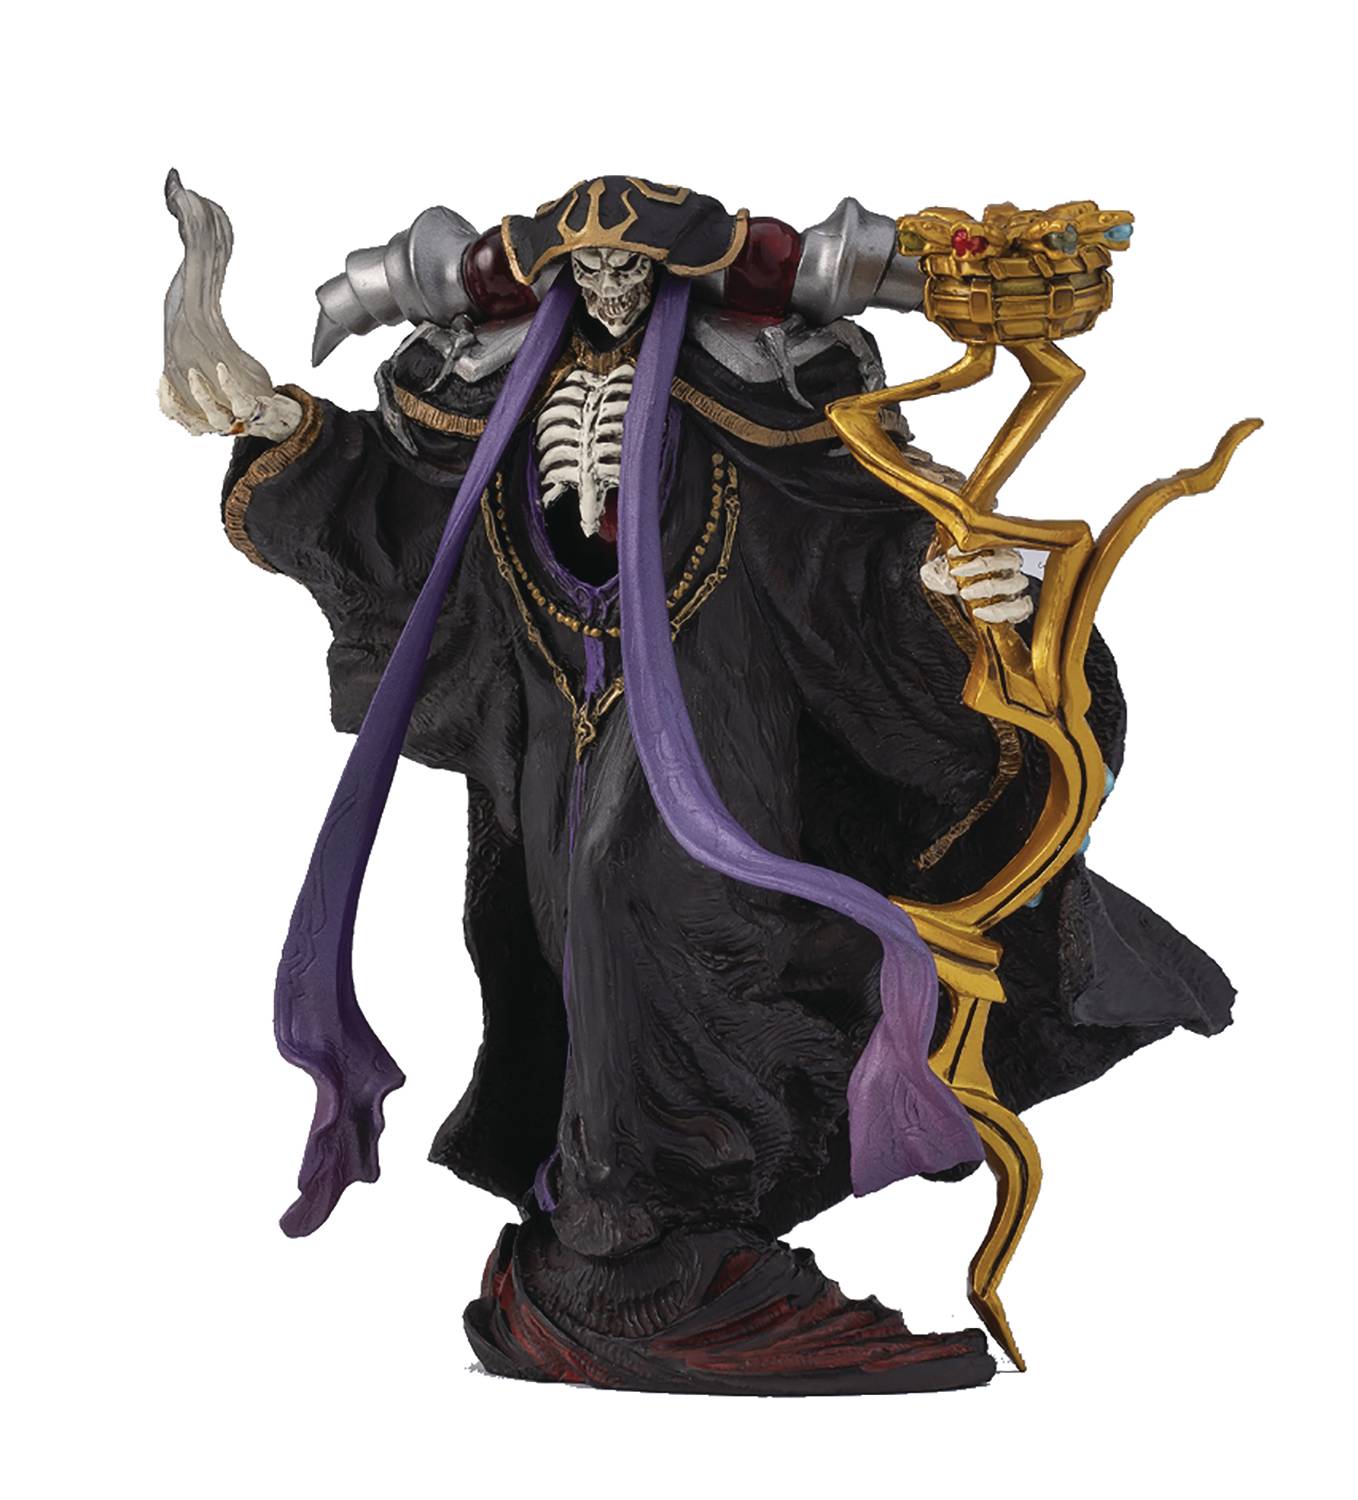 Overlord Ainz Ooal Gown & Momon B2 Tapestry Wall Scroll ebten Limited Bonus